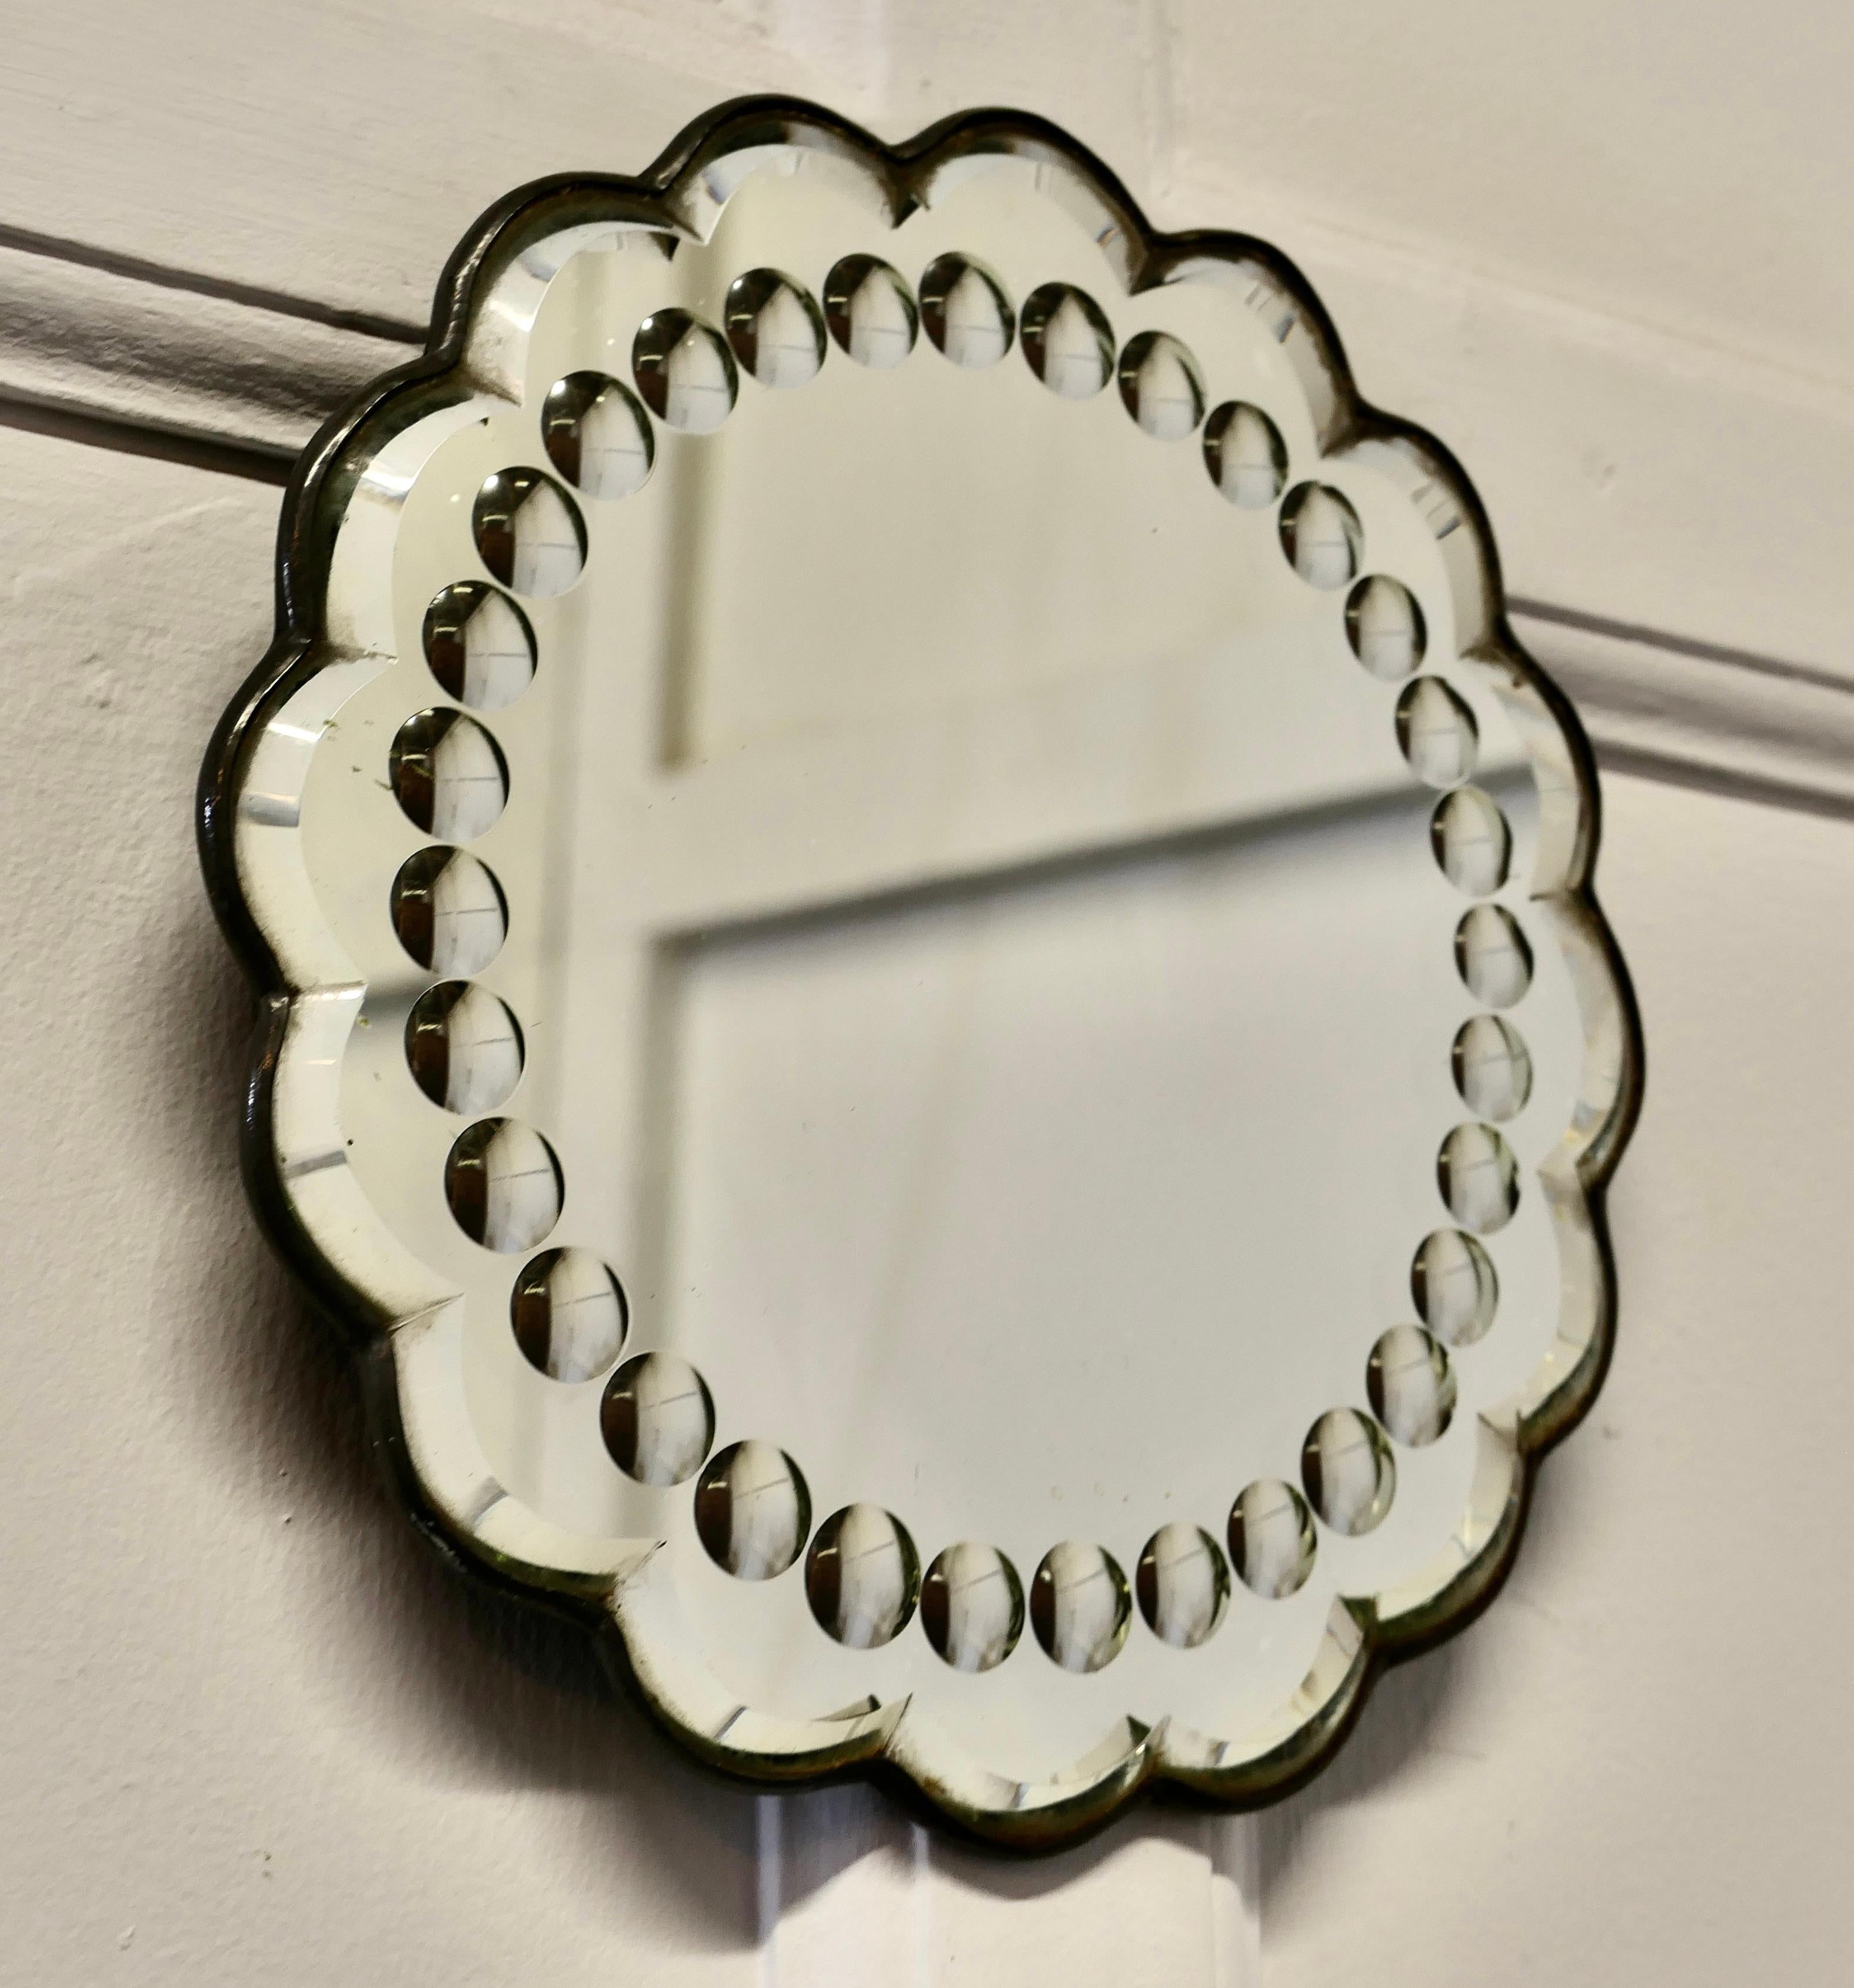 Old foxed Art Deco shabby circular mirror .

A lovely piece for the right person, the mirror is round with bevelled scalloped edging.
This unusual mirror has bevelled roundels etched into the thick glass, the mirror is slightly foxed around the